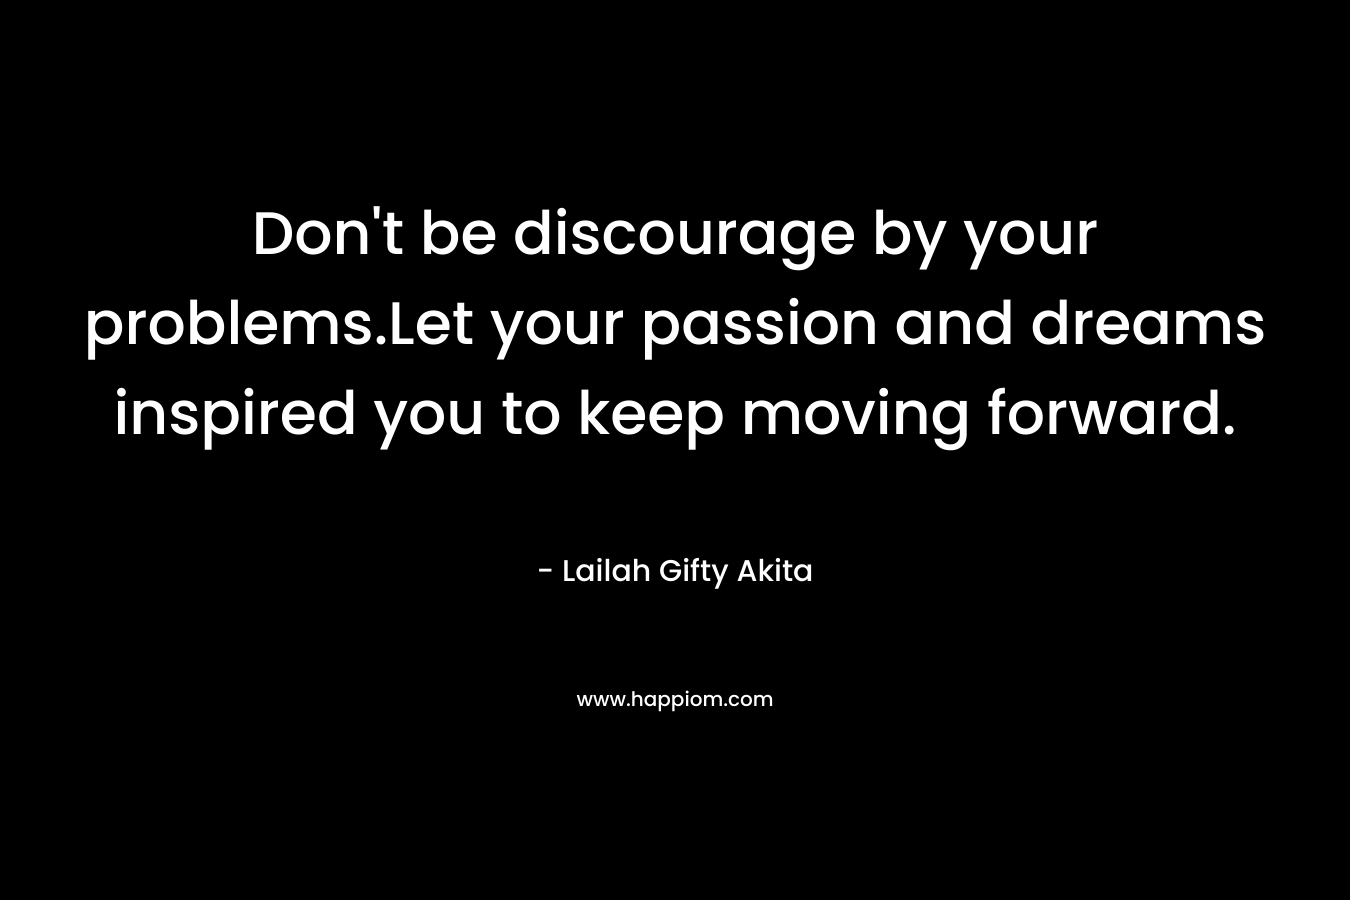 Don’t be discourage by your problems.Let your passion and dreams inspired you to keep moving forward. – Lailah Gifty Akita